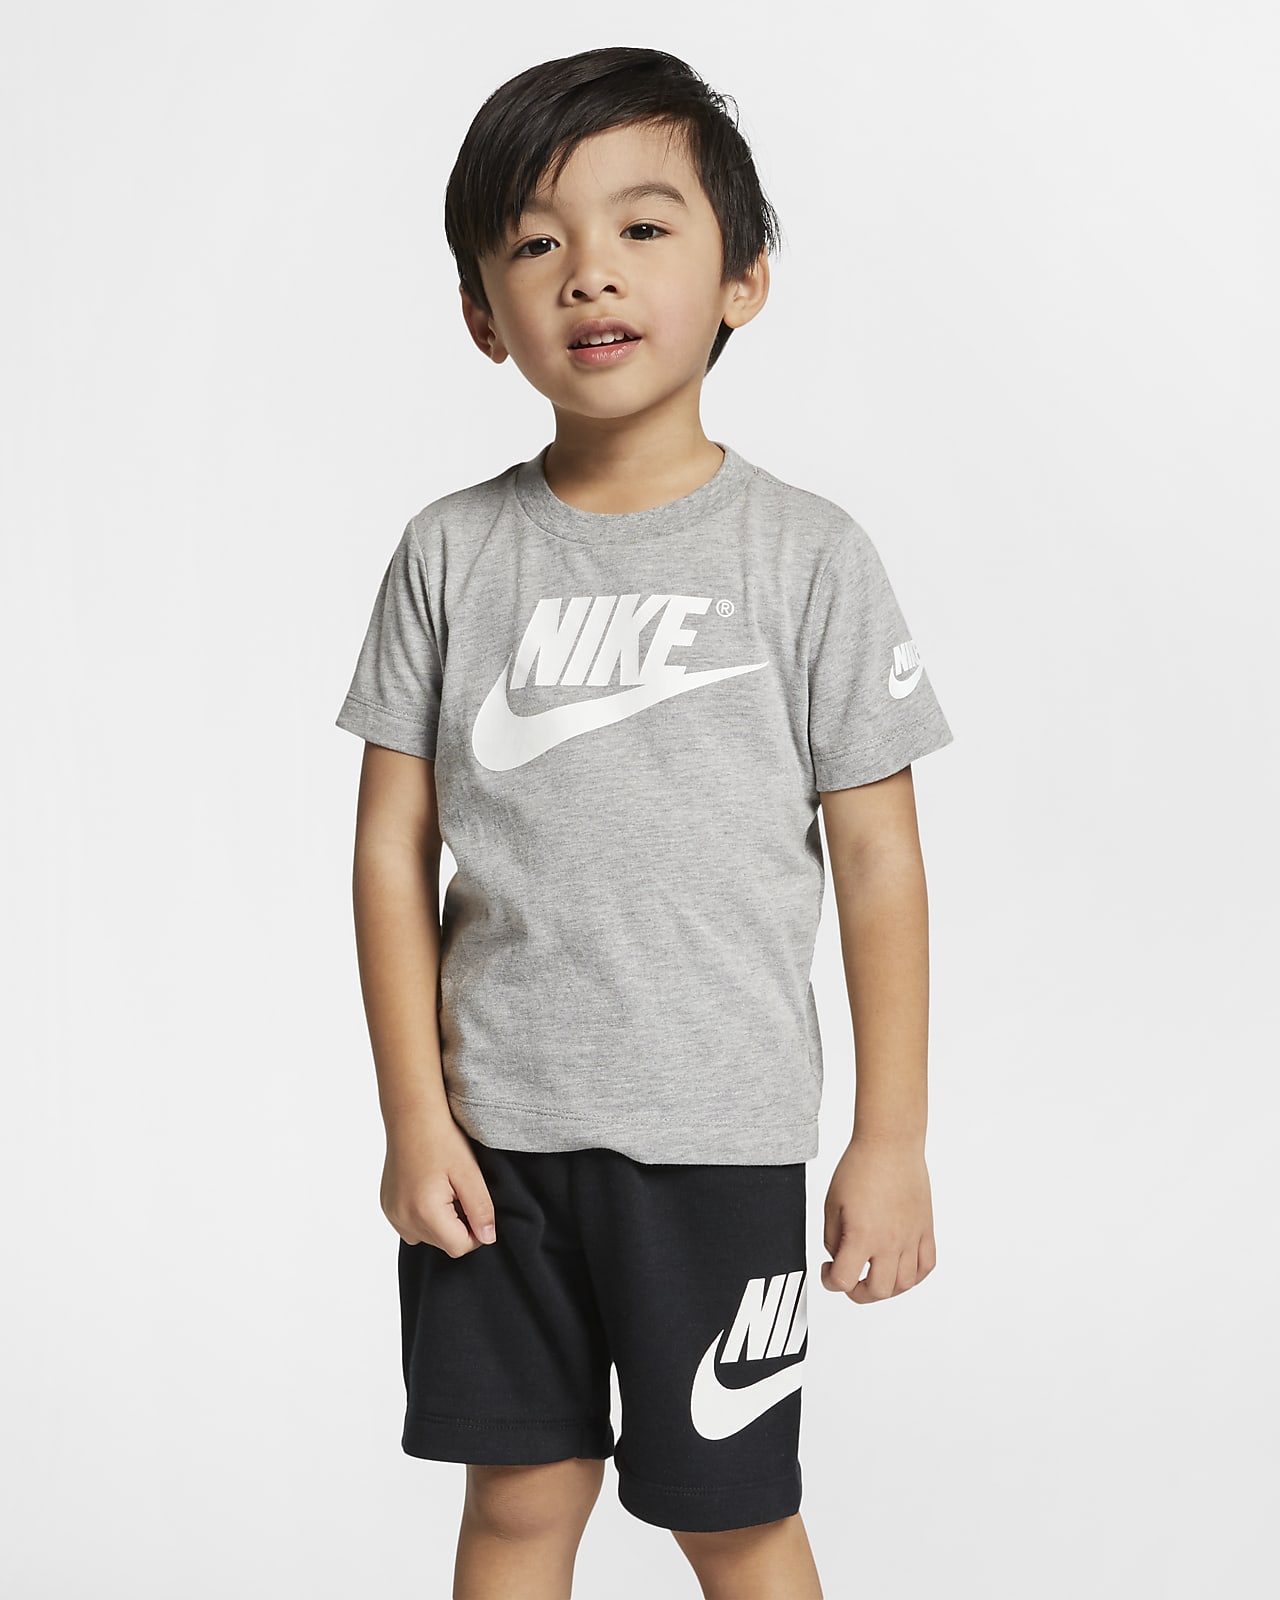 nike short sets for toddlers